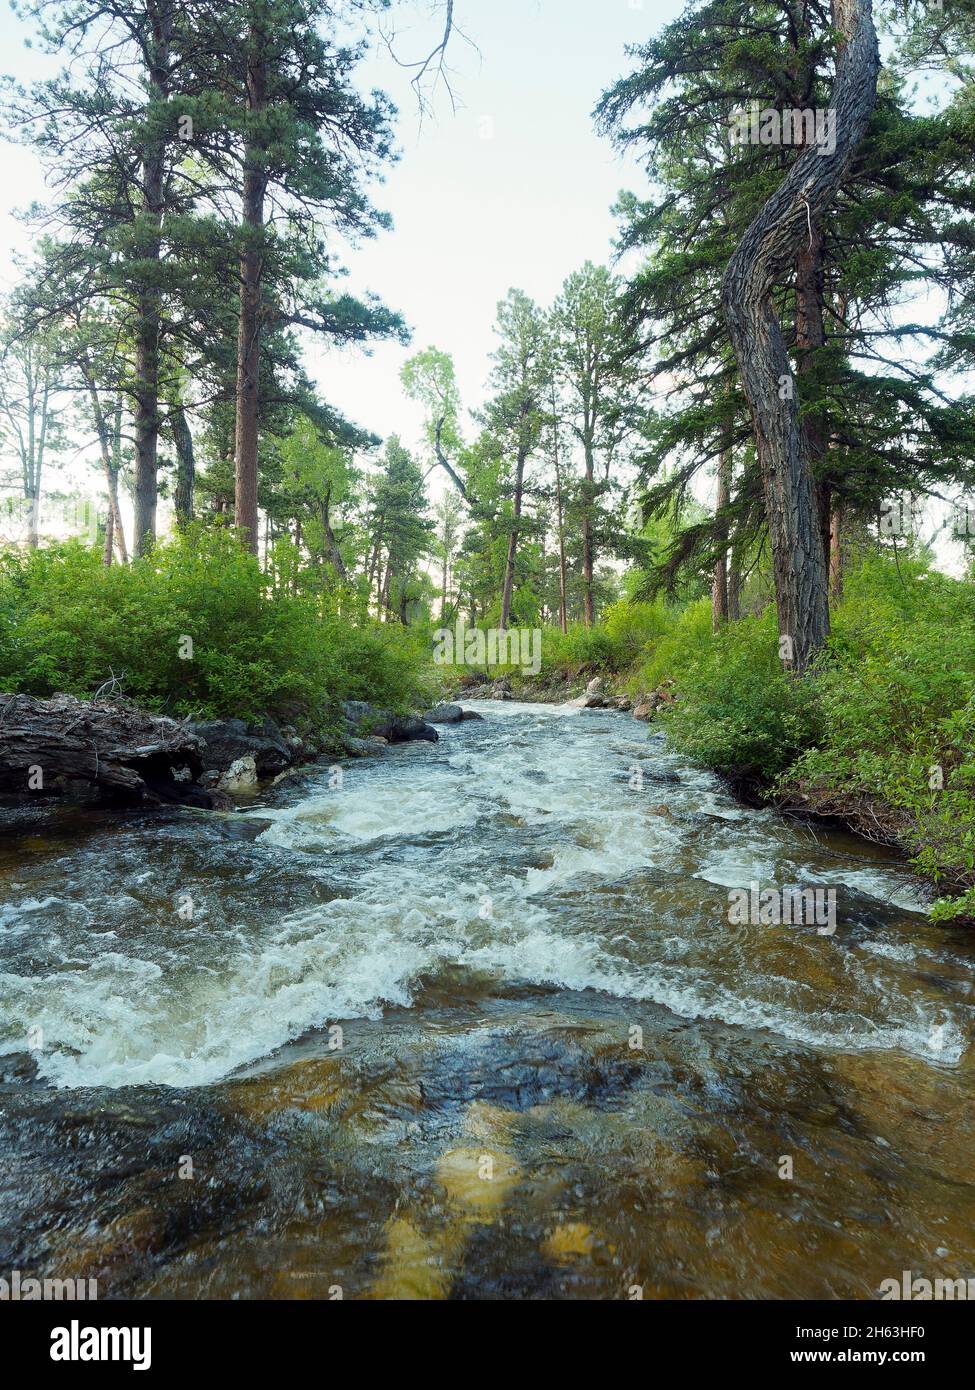 american west,babbling brook,clear stream rushing through forest,de-stress,flow,green,landscape,natural,nature,overcast,cloudy light,peaceful,pure,refreshing,relaxing,restful,trees,usa,wyoming,bighorn mountains,water,water course Stock Photo